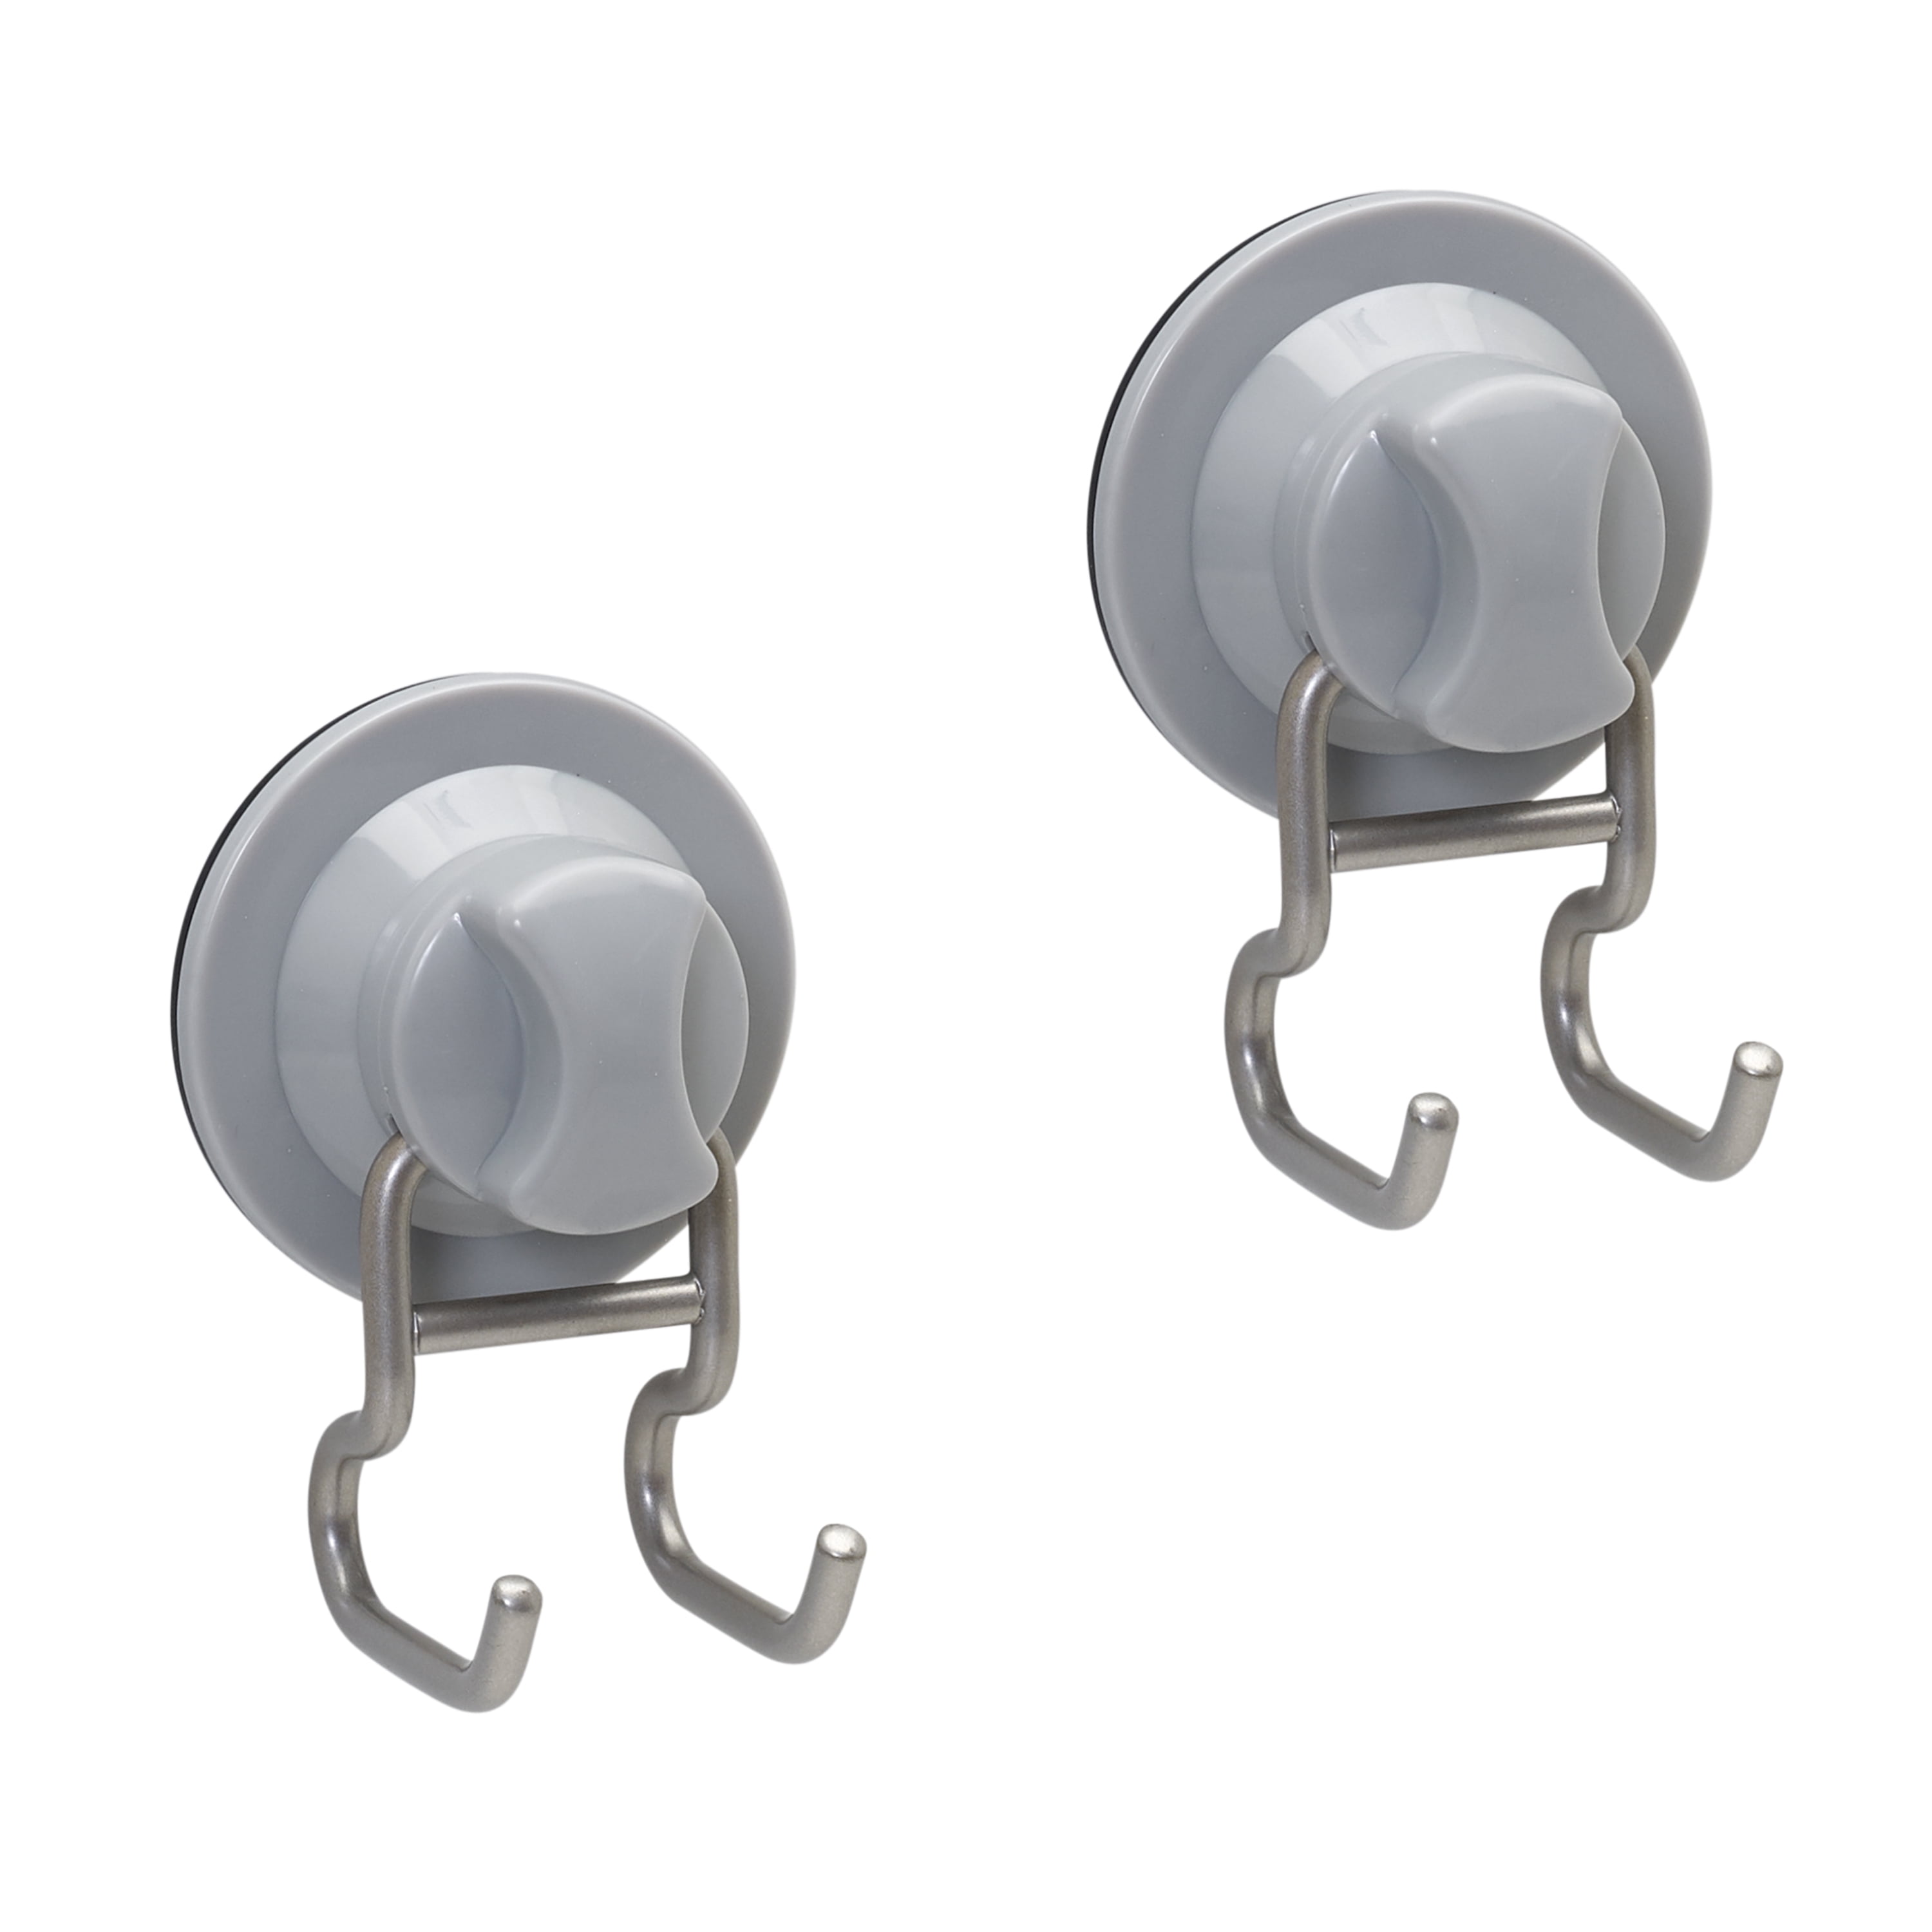 Trucker Tough Mighty Hook - Heavy Duty Suction Cup Hooks, Large, Chrome :  : Tools & Home Improvement